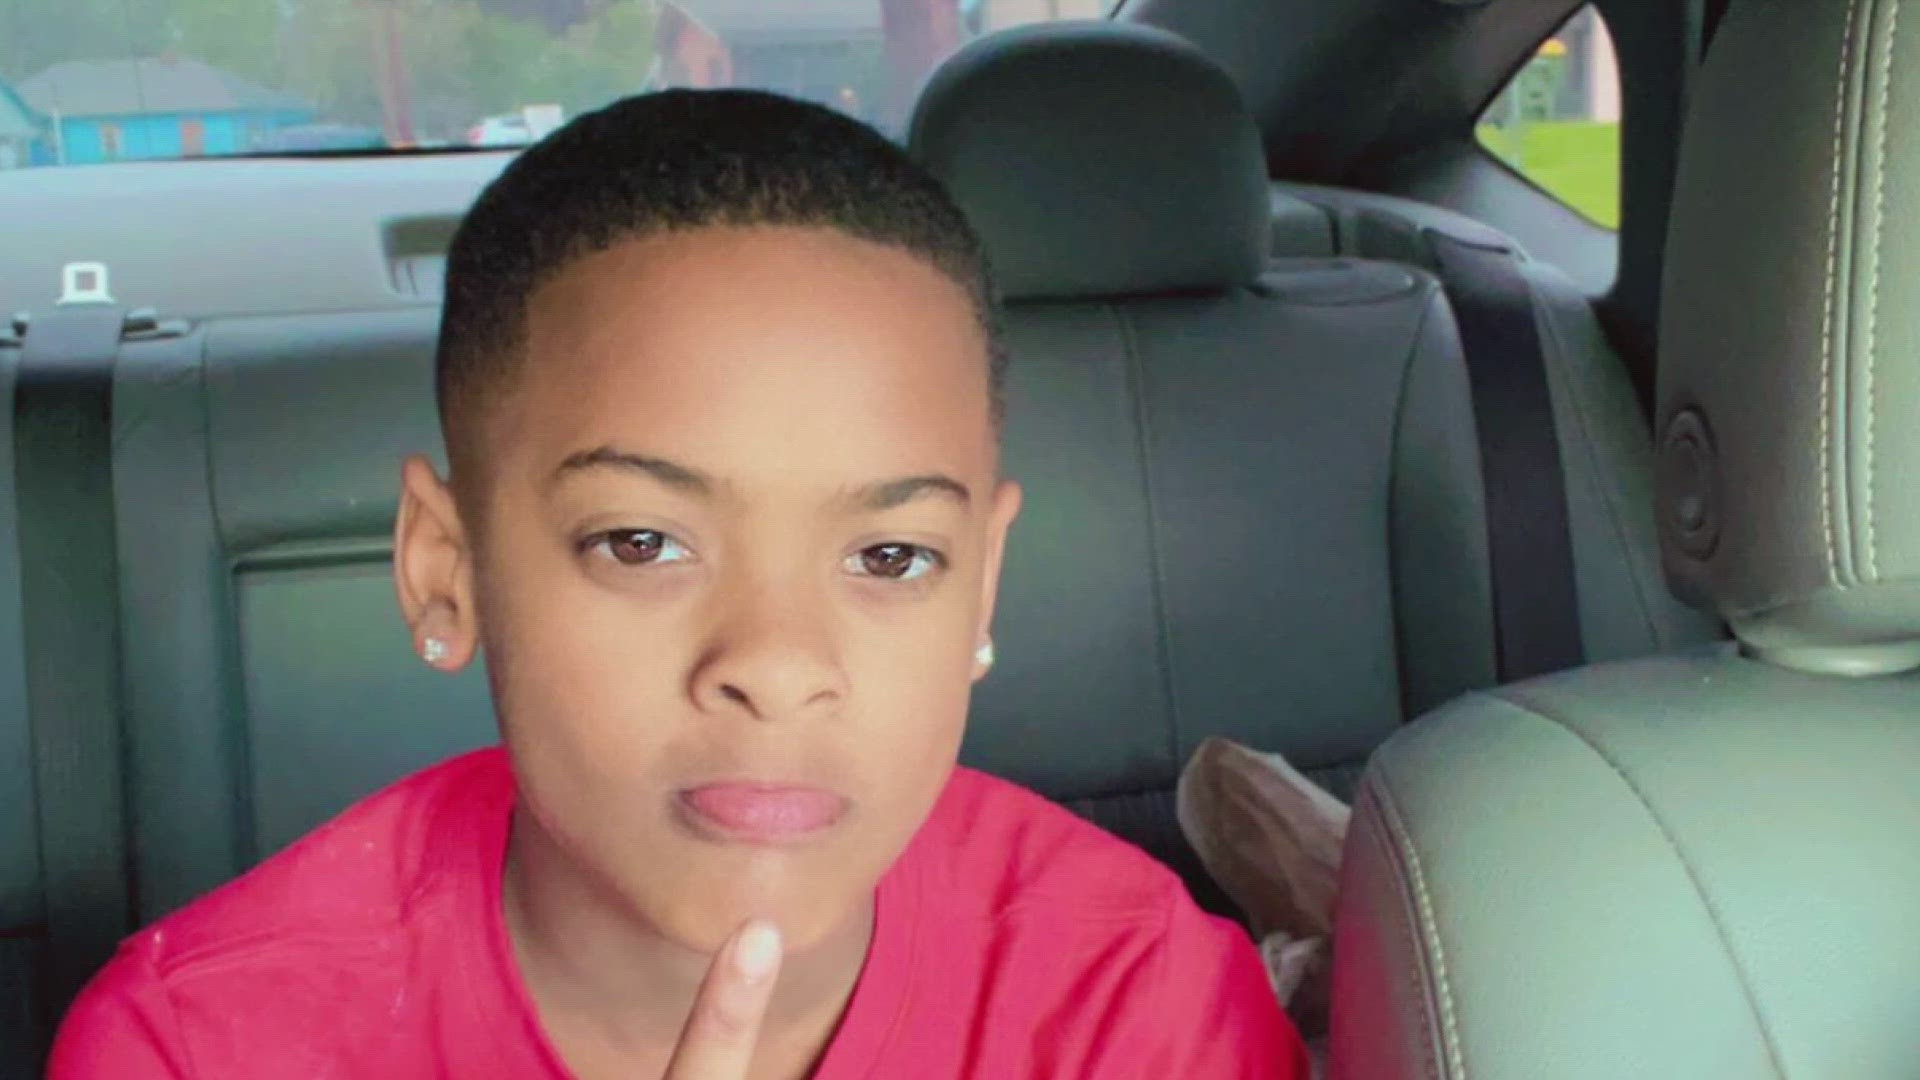 10-year-old Donte Trotter tragically died following a severe asthma attack.